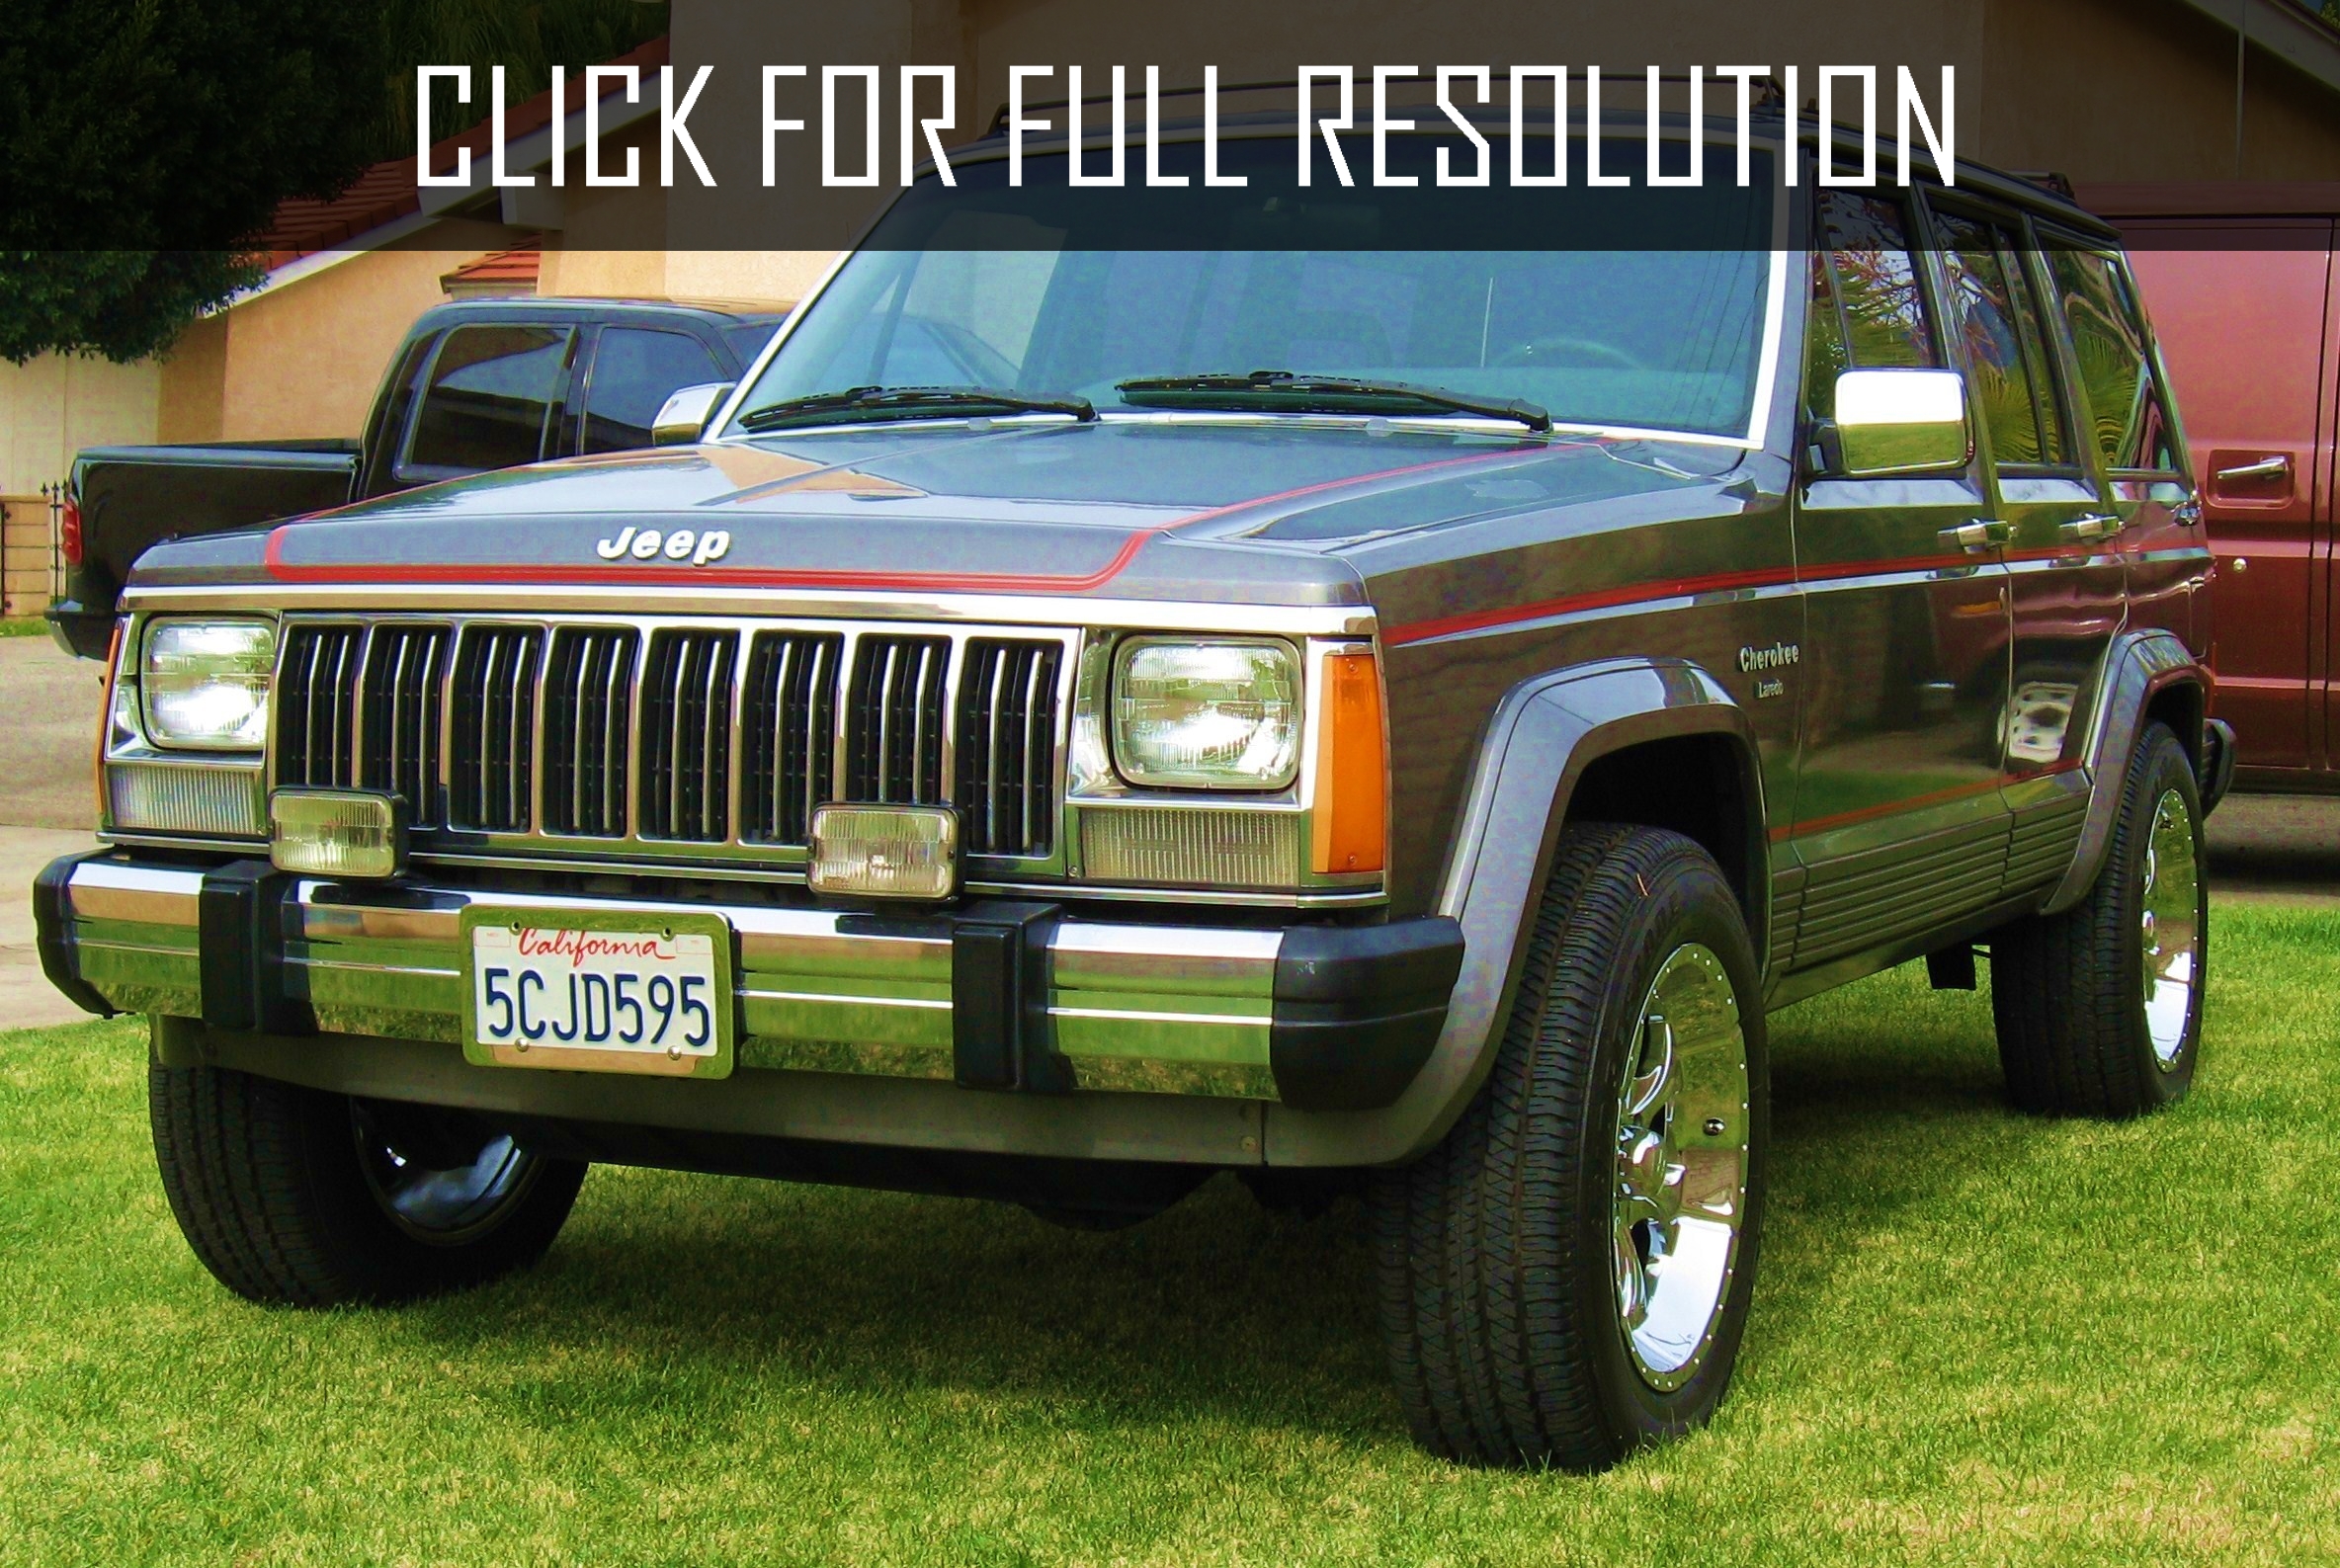 1989 Jeep Cherokee Limited news, reviews, msrp, ratings